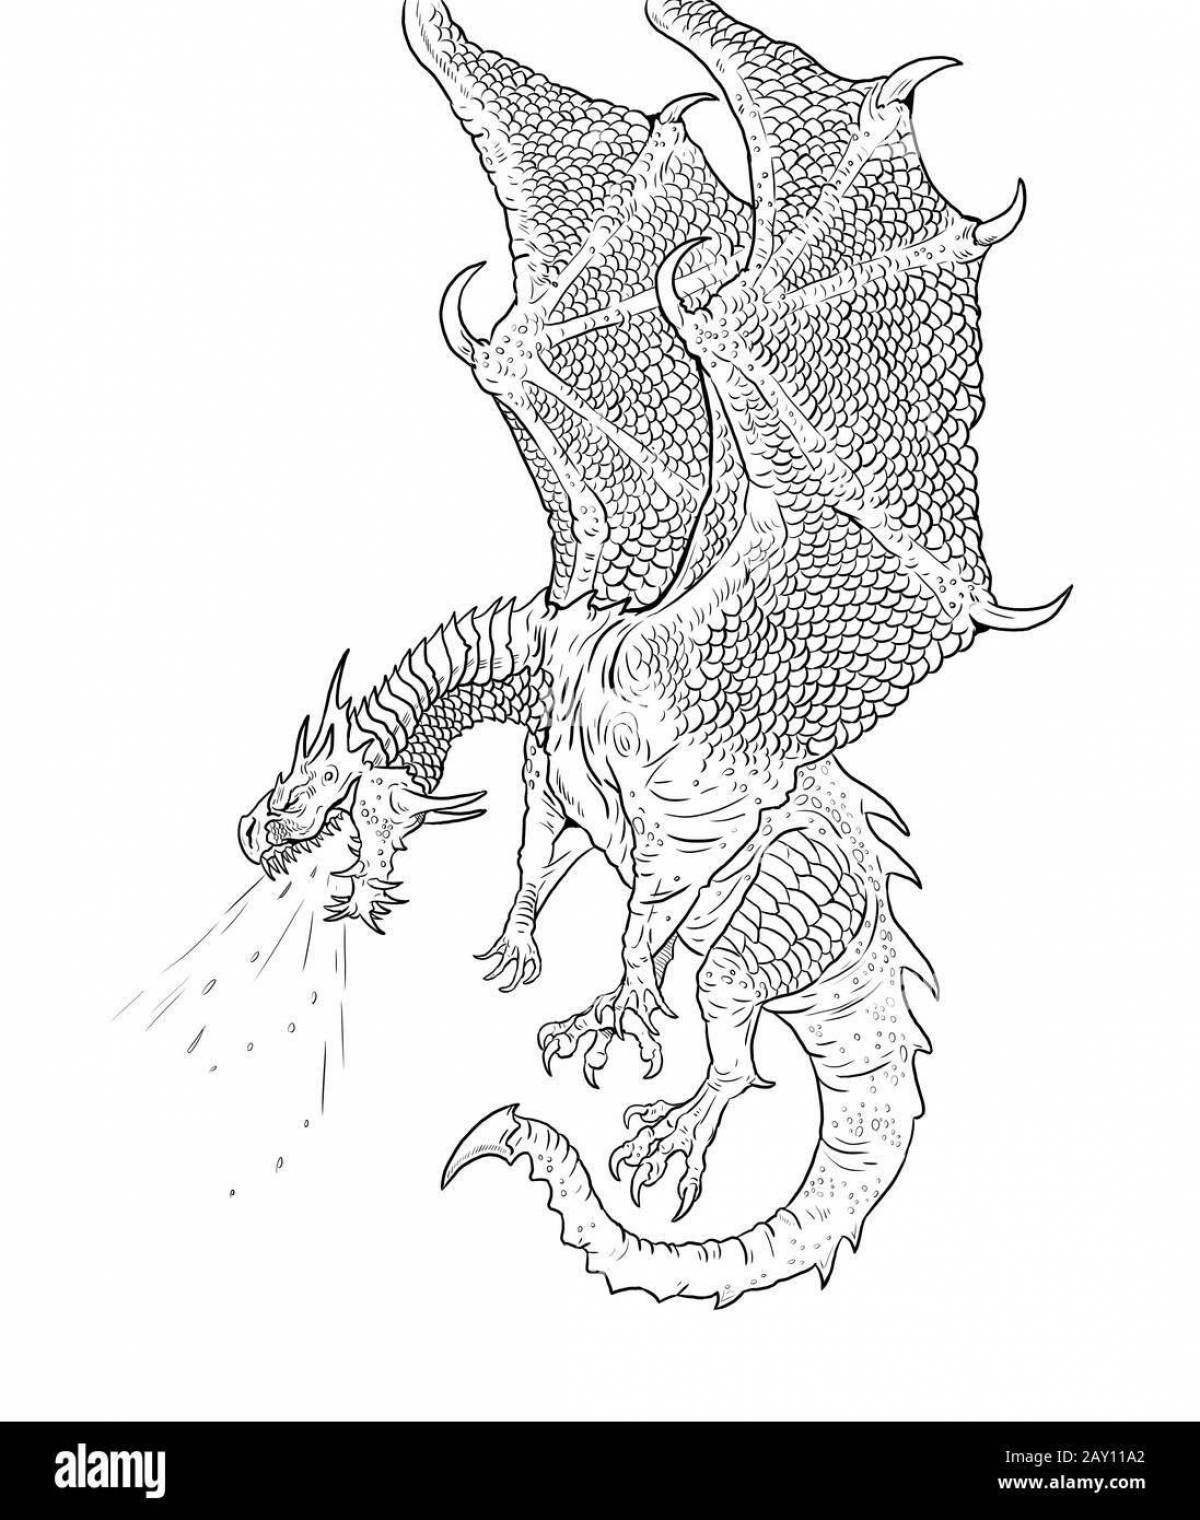 Adorable coloring pages dragons of the nine worlds